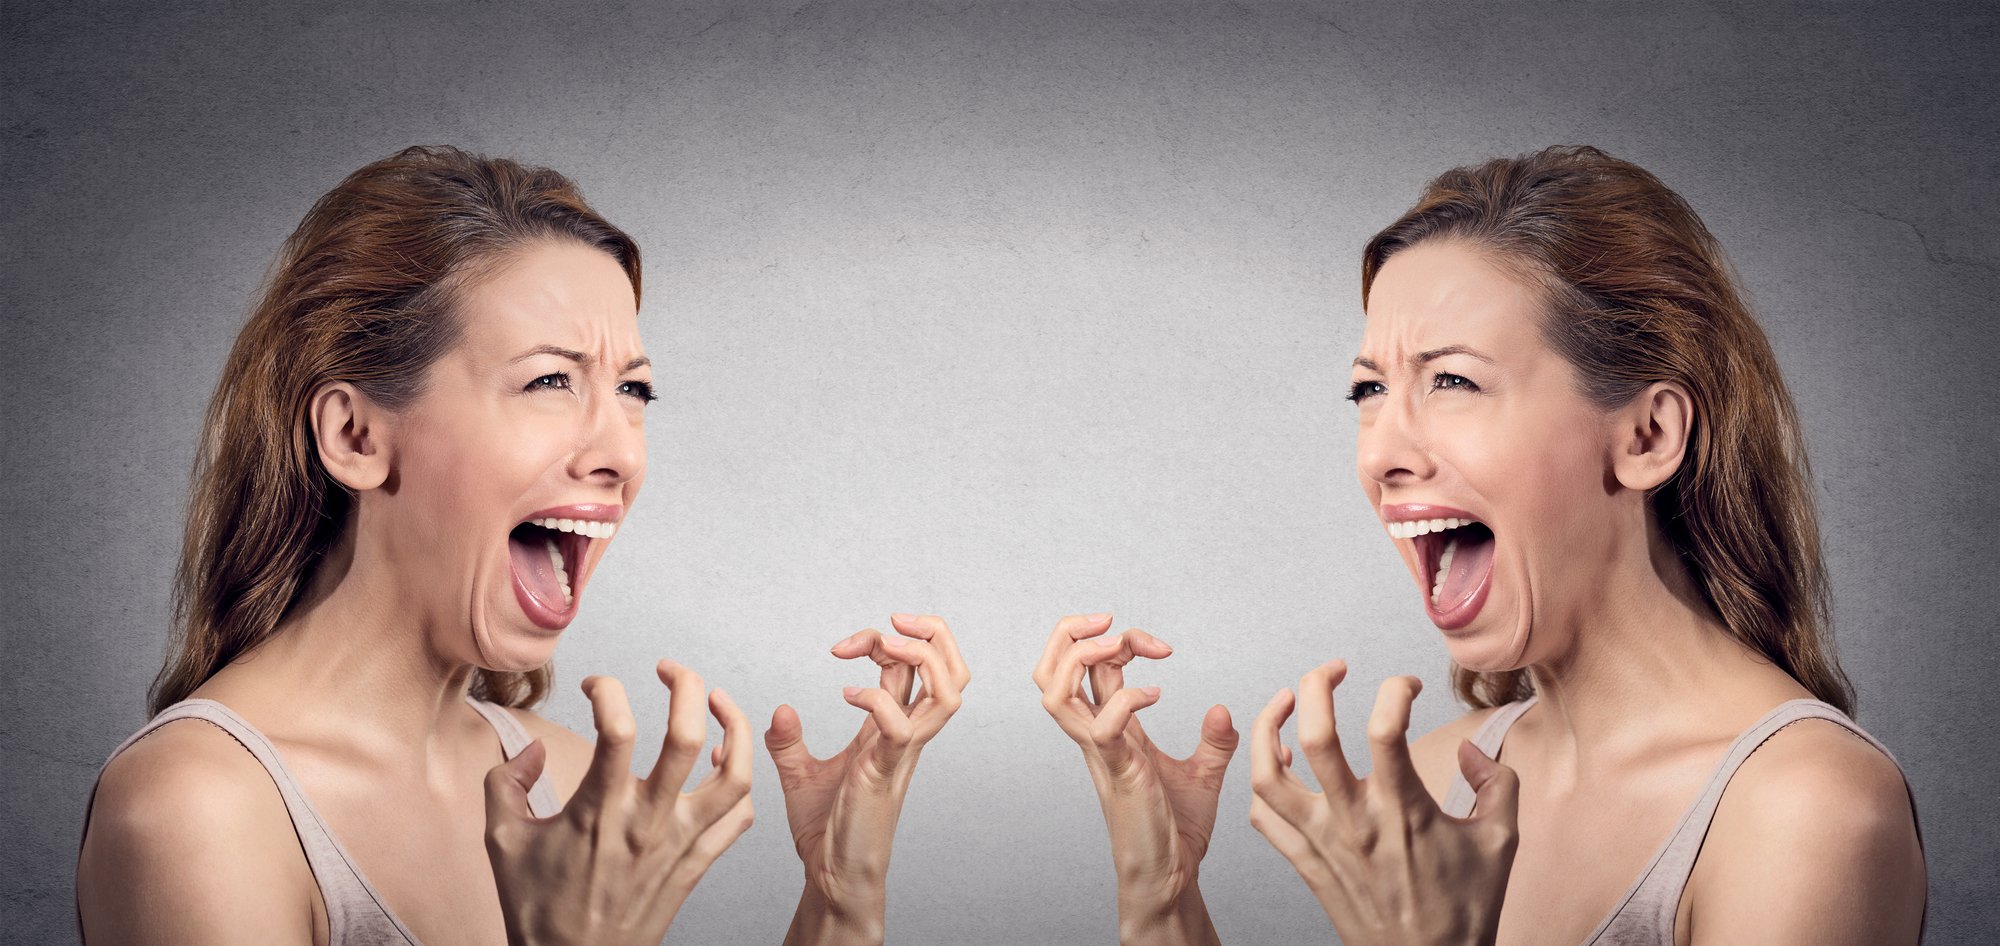 Bipolar Anger: Why It Happens and How to Cope in 4 Steps